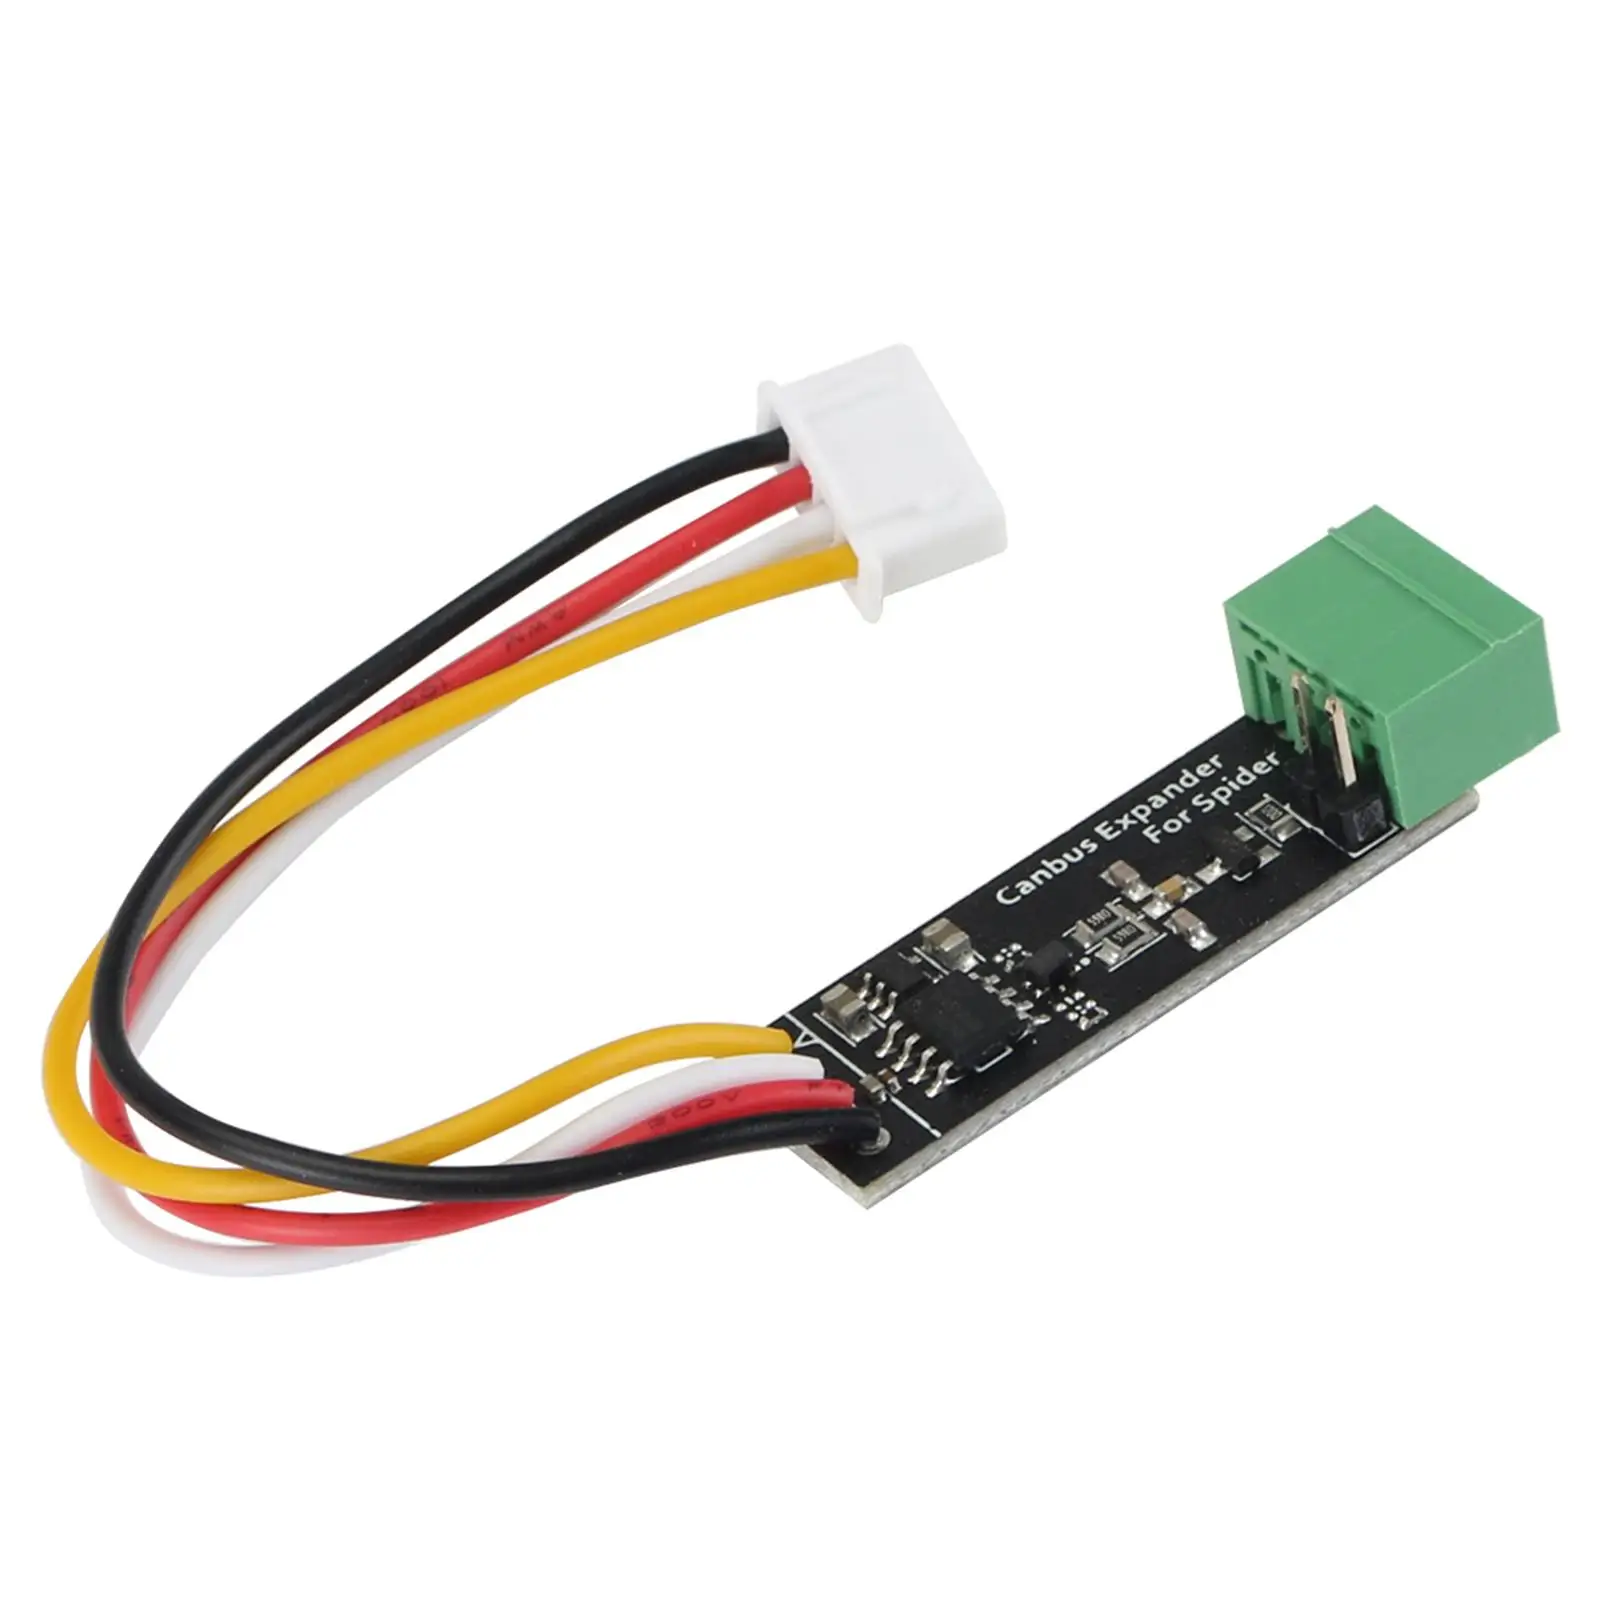 Canbus Expander Module Replacement Accessory Transceiver for Spider Board